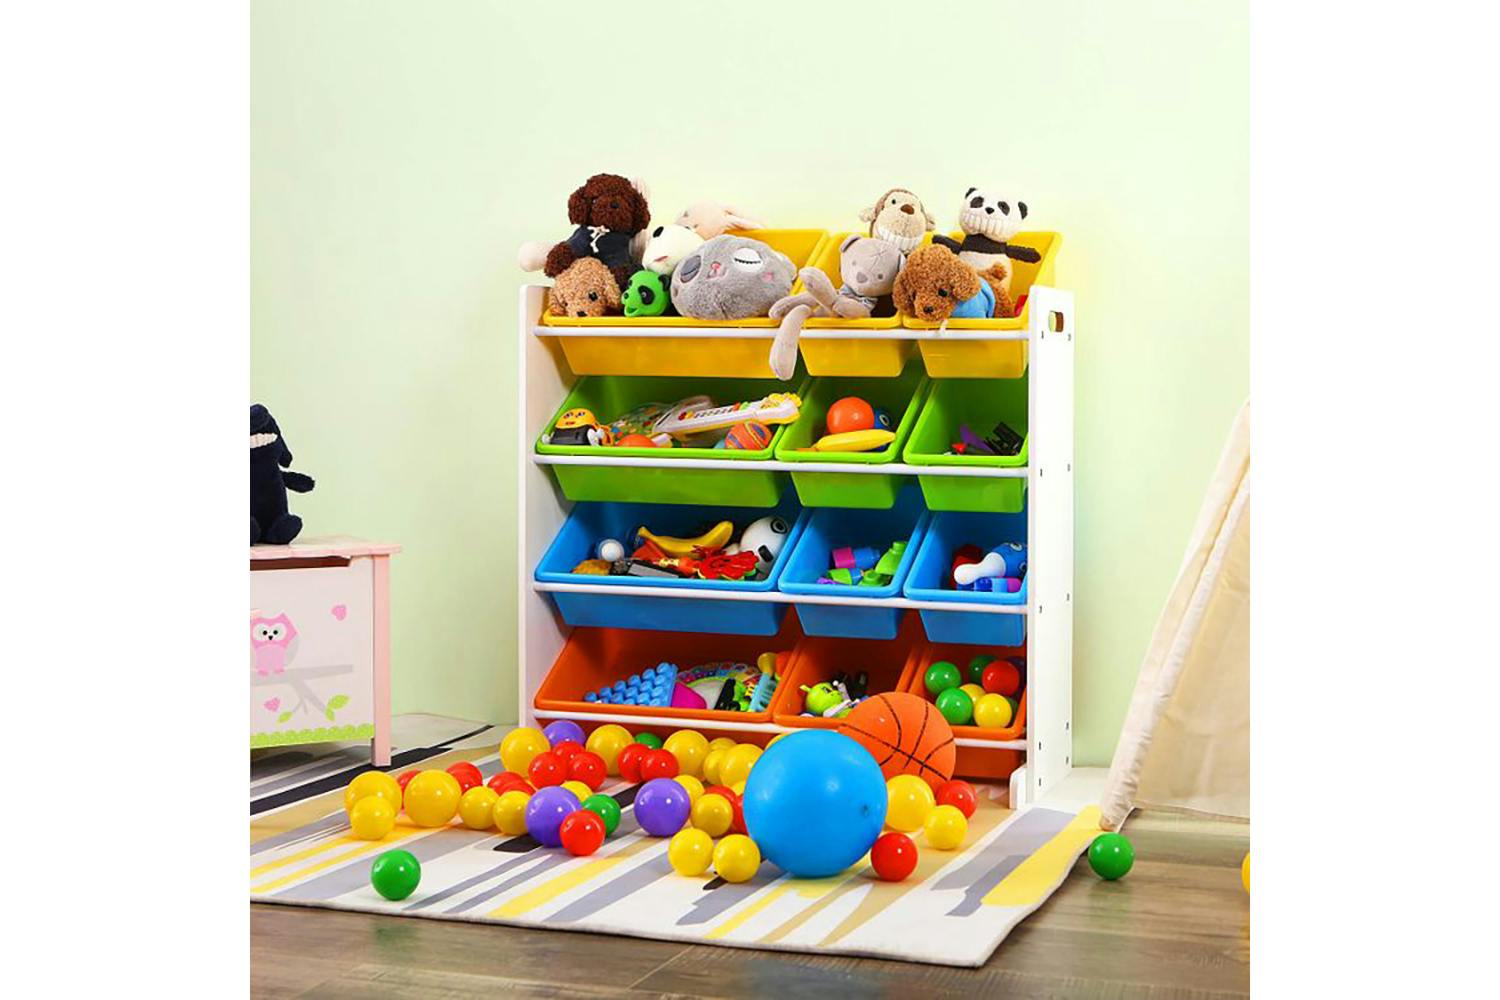 Songmics GKR04W Children's Room Shelf with Colorful Boxes